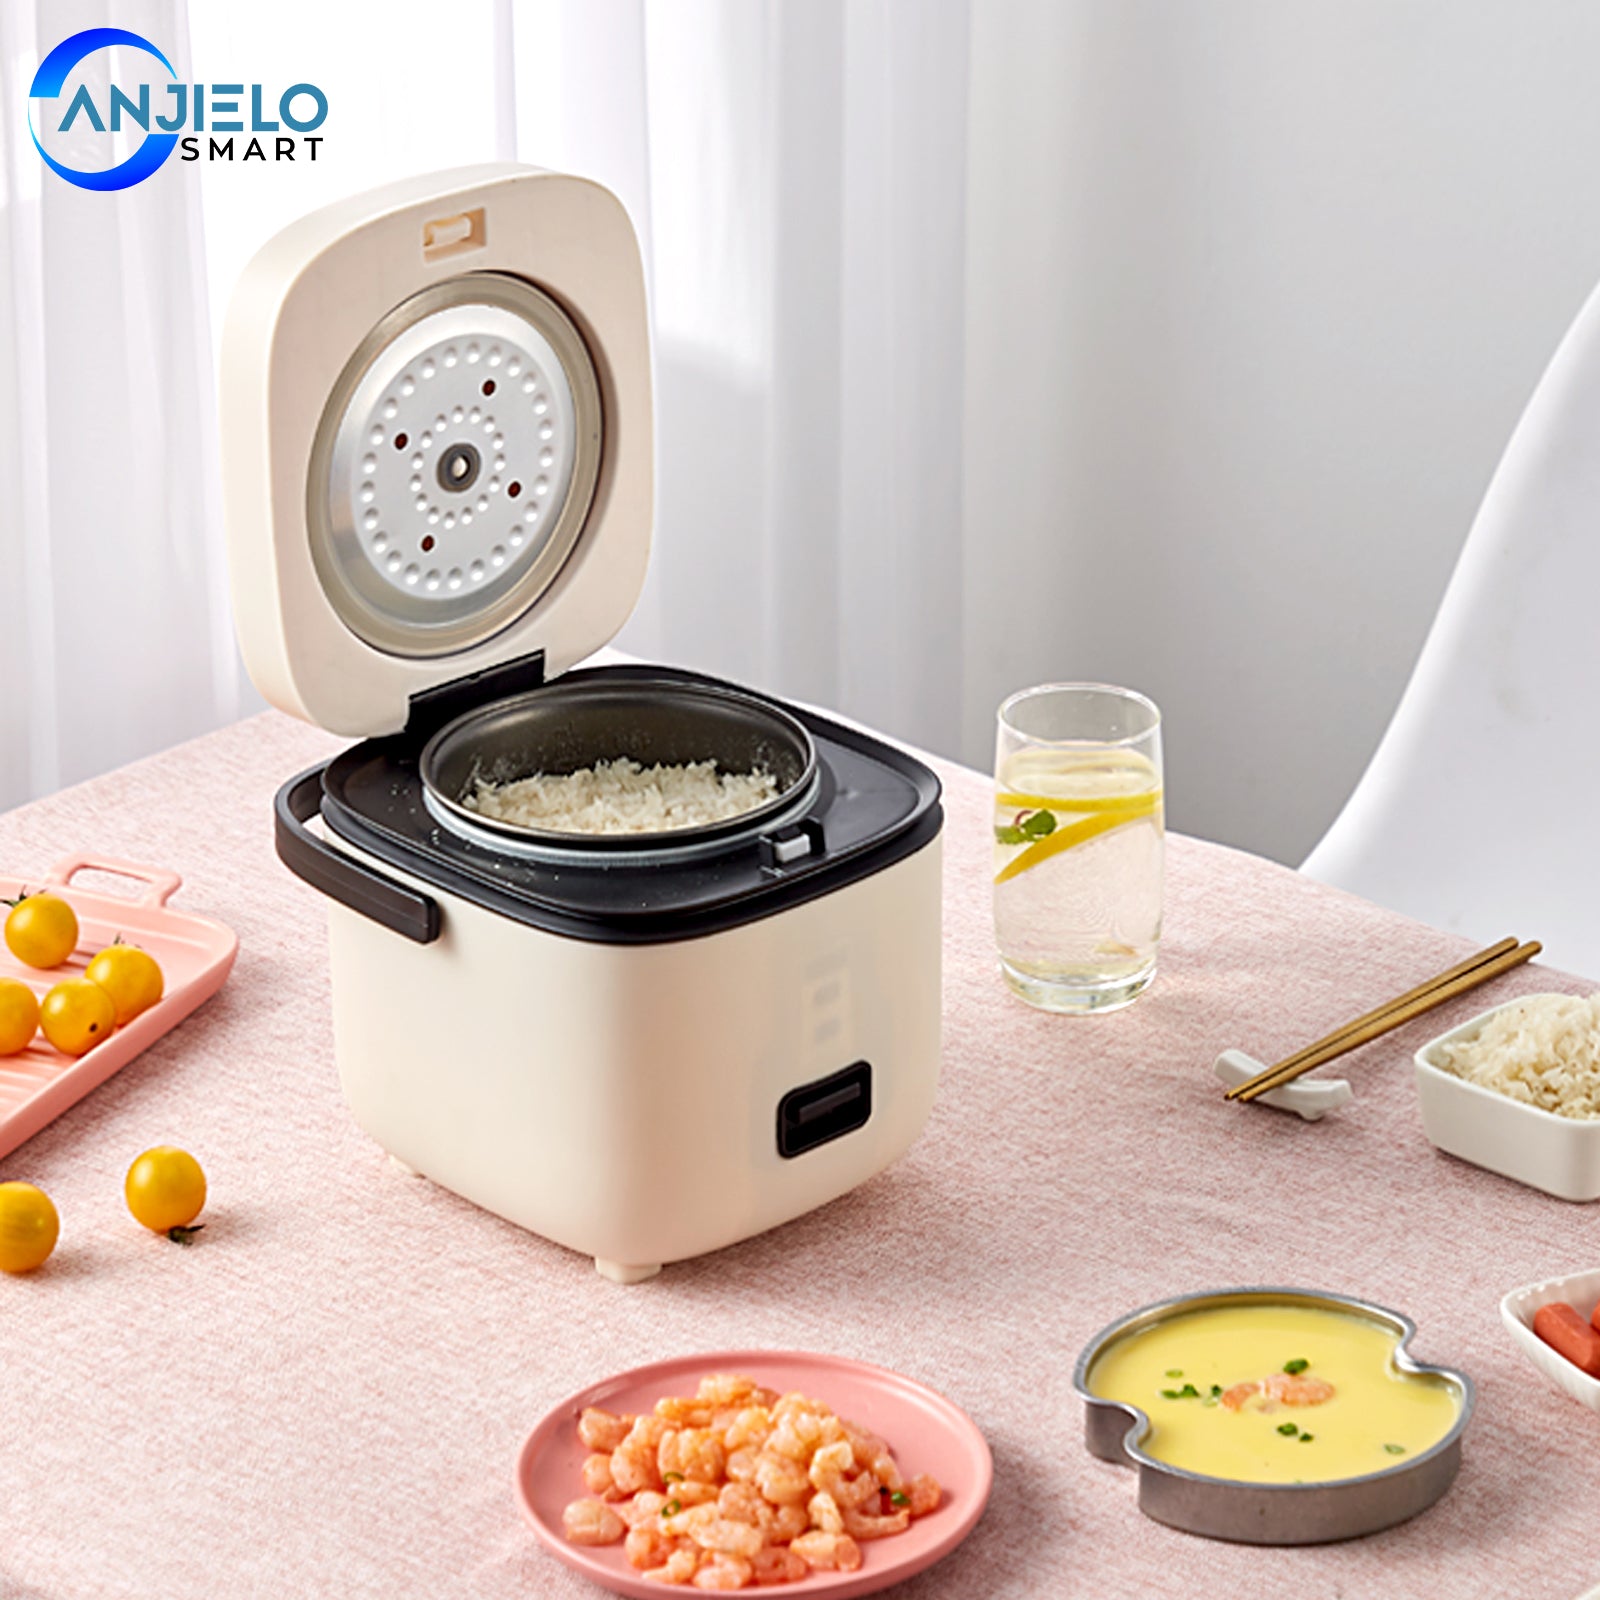 Rice Cooker Small 6 Cups Cooked(3 Cups Uncooked), 1.5L Small Rice Cooker  With Steamer For 1-3 People